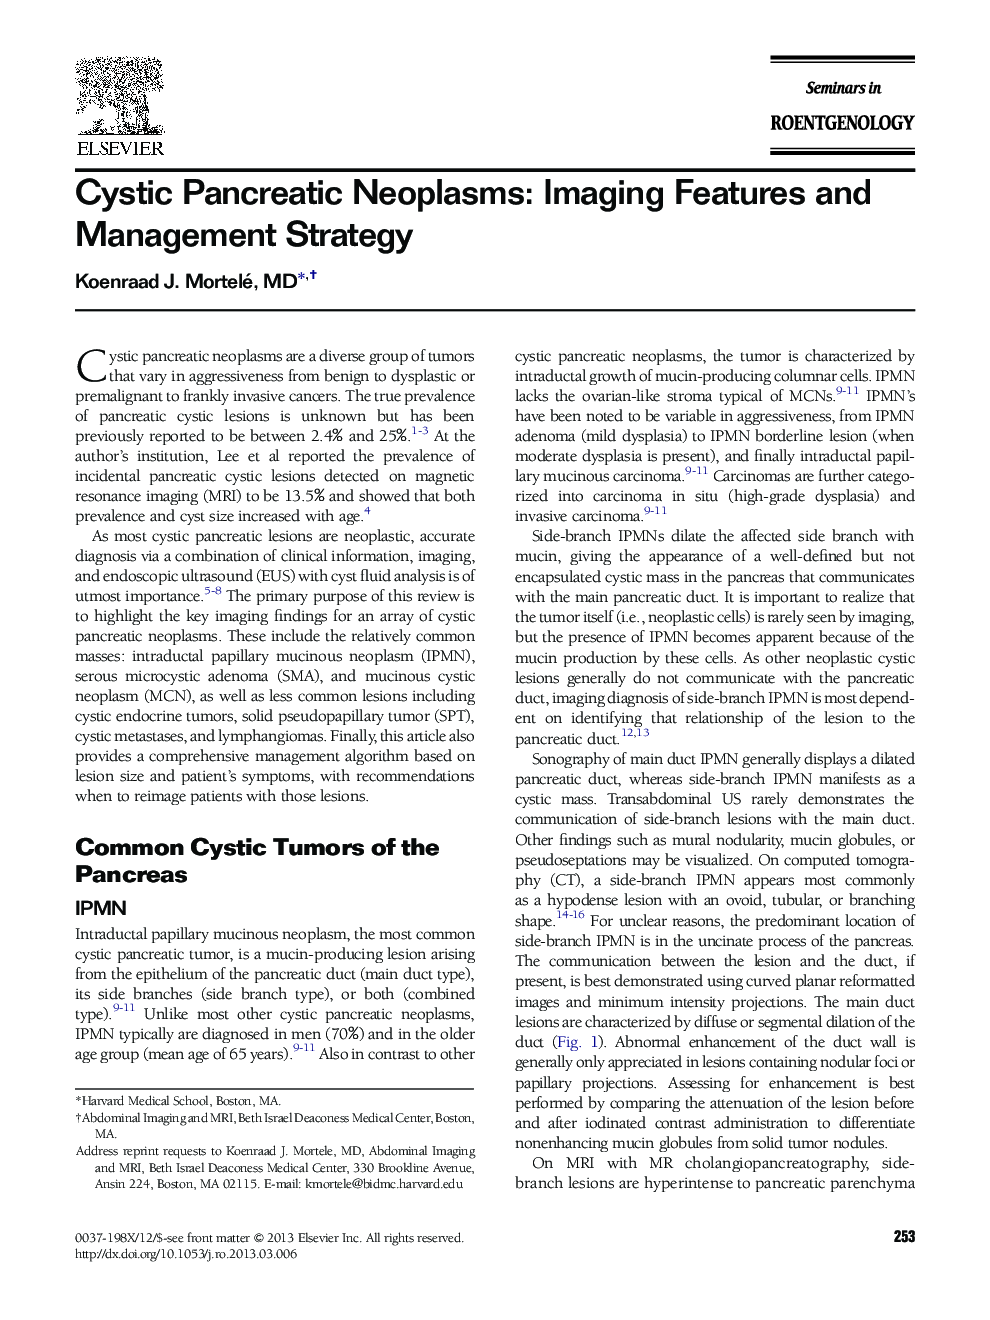 Cystic Pancreatic Neoplasms: Imaging Features and Management Strategy